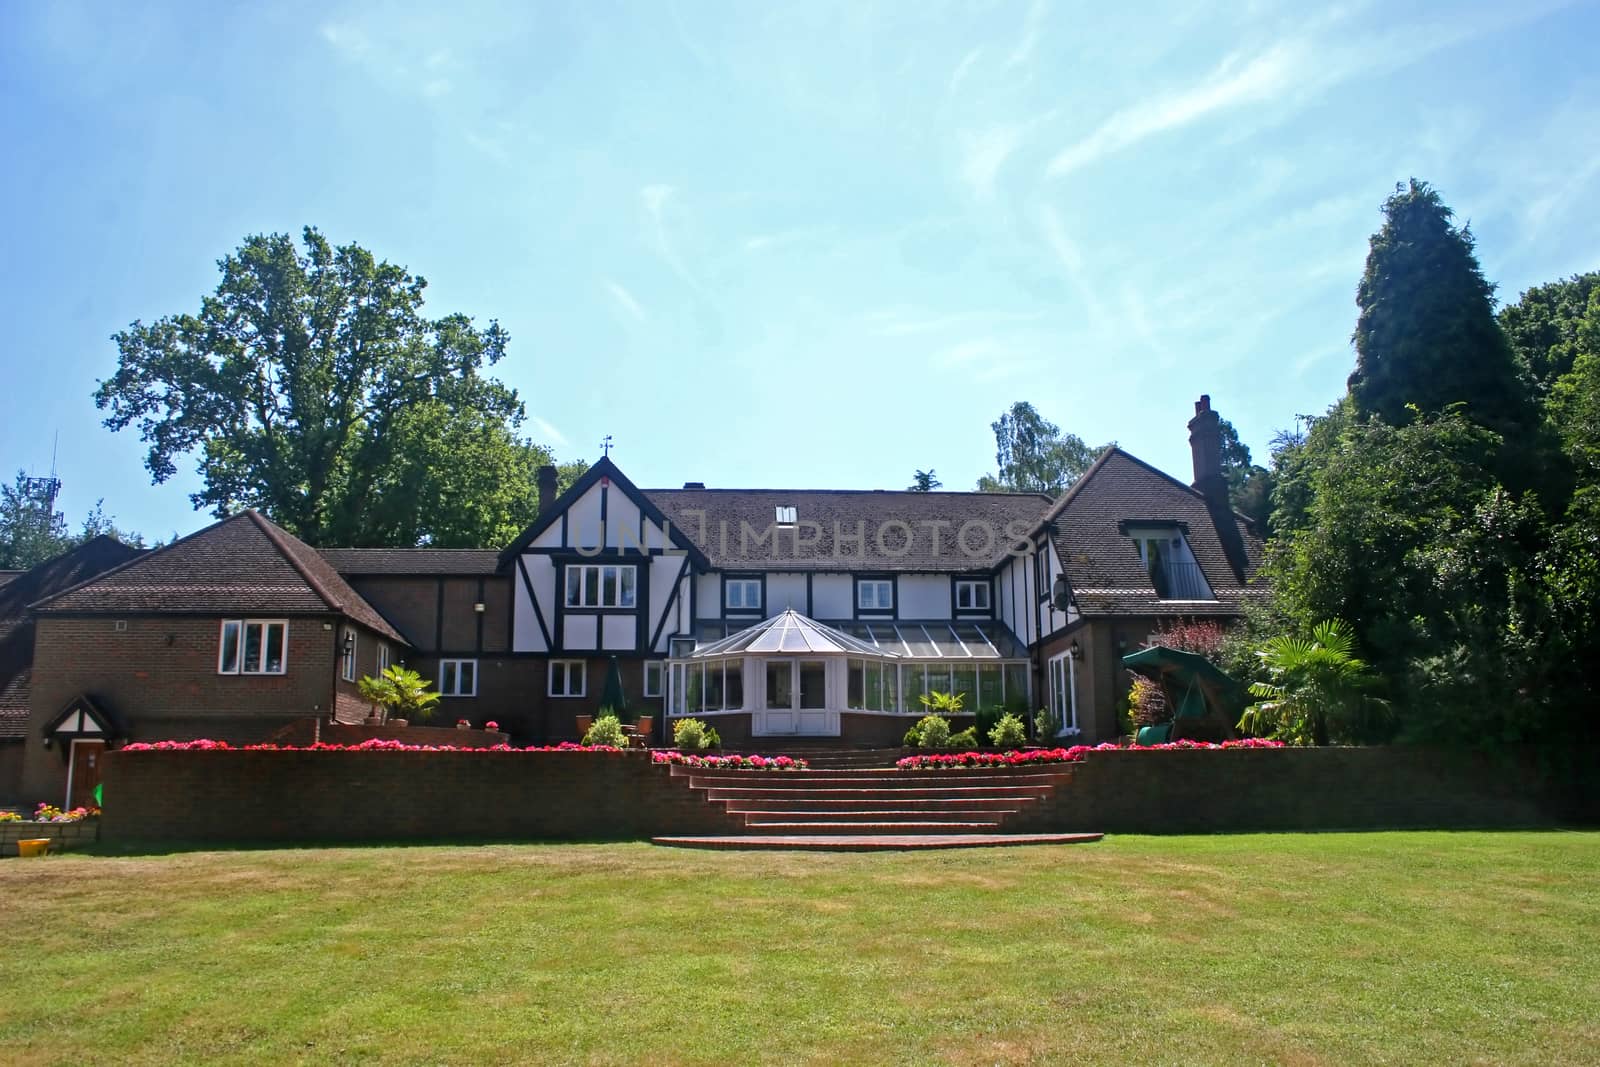 A large estate home, tudor style, in the UK